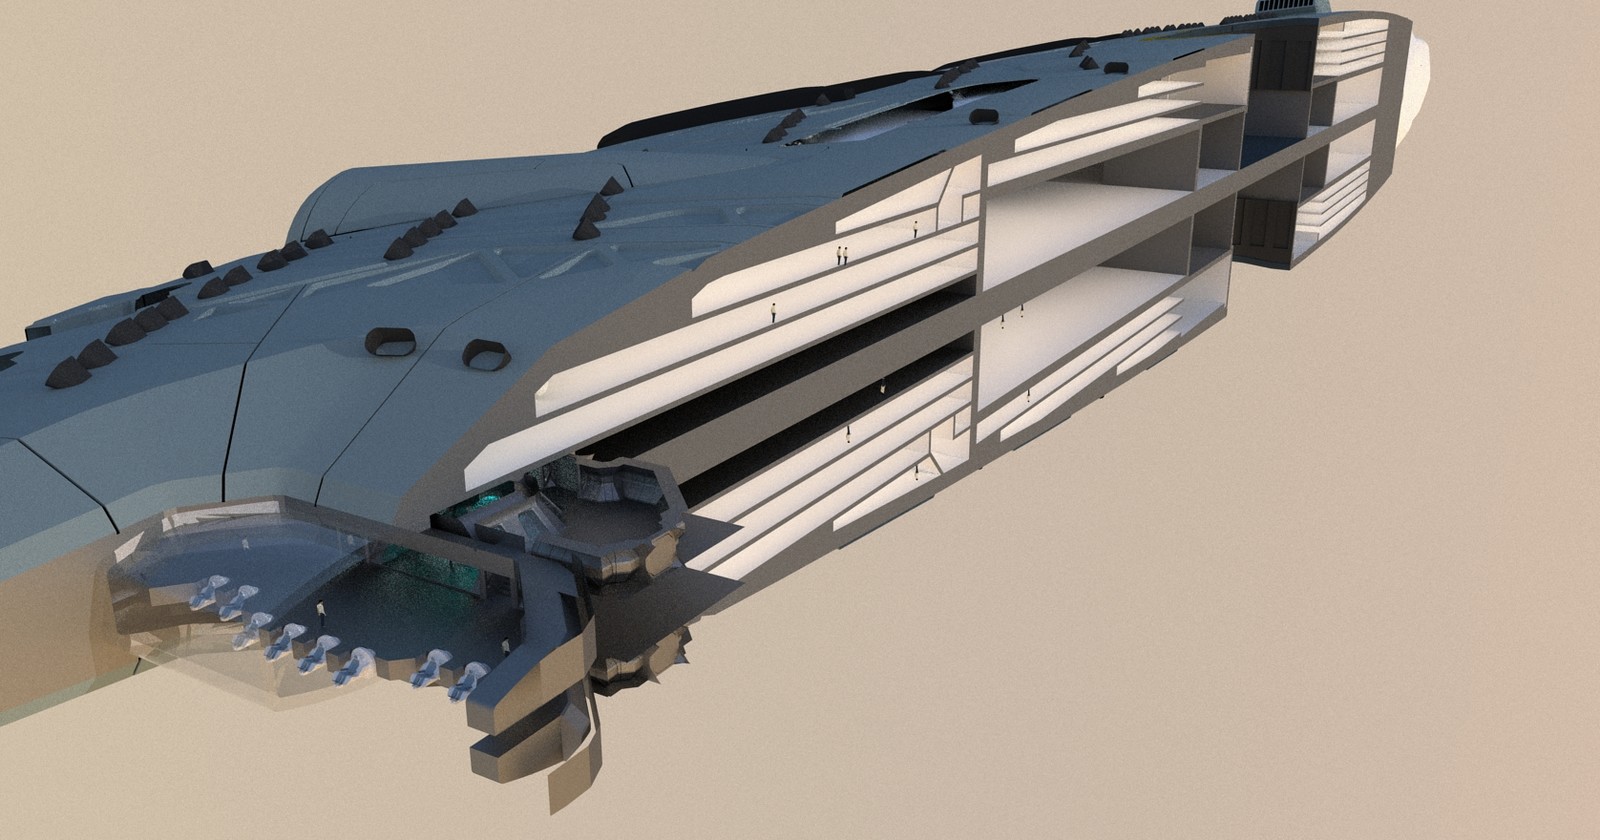 wip of the internal layout of the ship